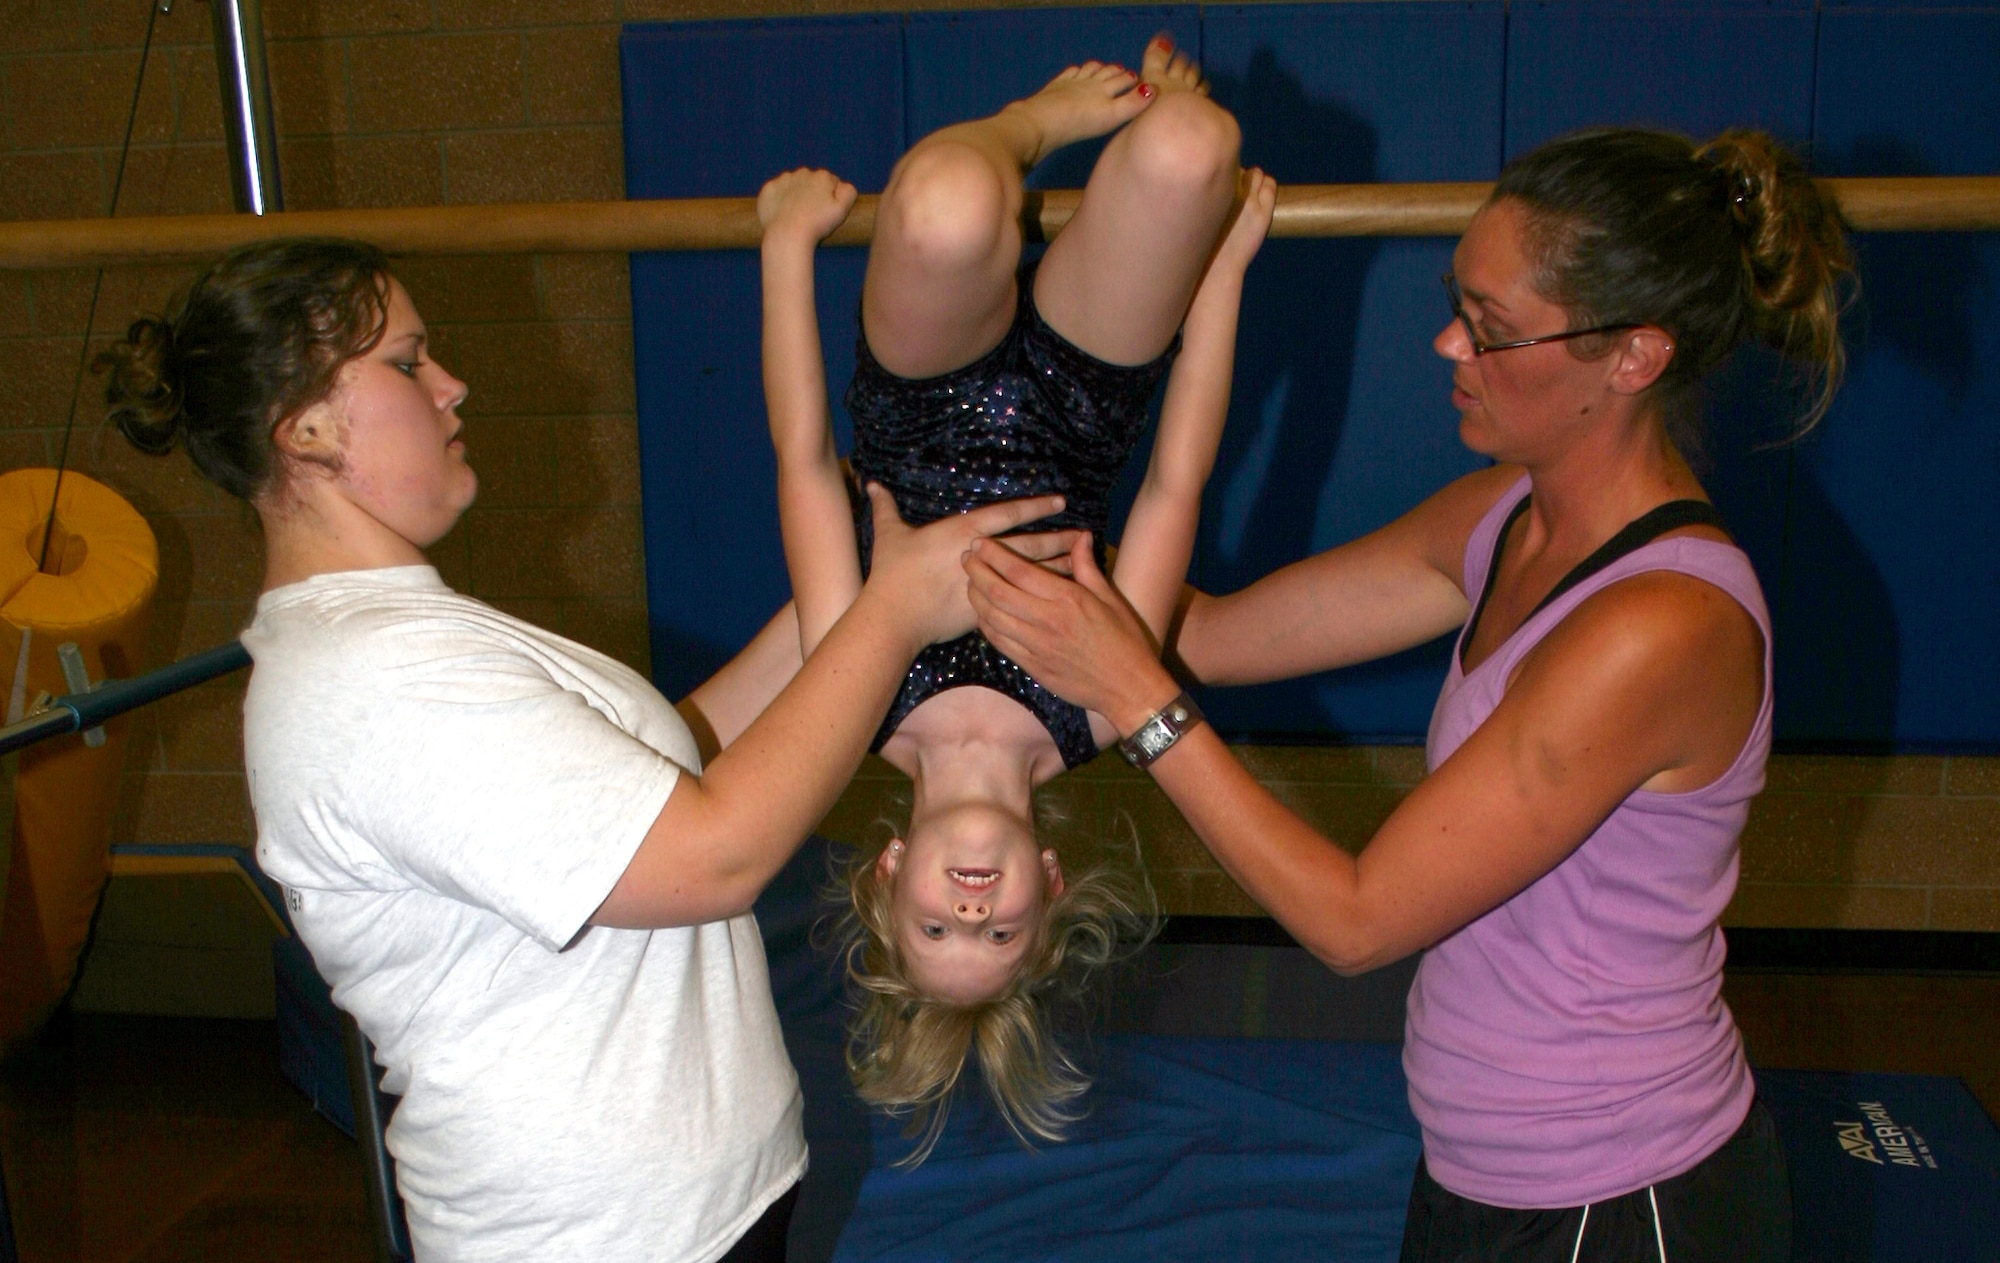 KinderGym teachers Deann Dangelmayr (left) and Sarah Bristow assist student Meredith Johnson in completing the gymnastics movement “skin the cat” on the 
uneven bars at the Madrigal Youth Center Tuesday. The center offers various classes in different skill and age levels, for information call 676-2342. (U.S. Air Force photo/Senior Airman Jacque Lickteig).